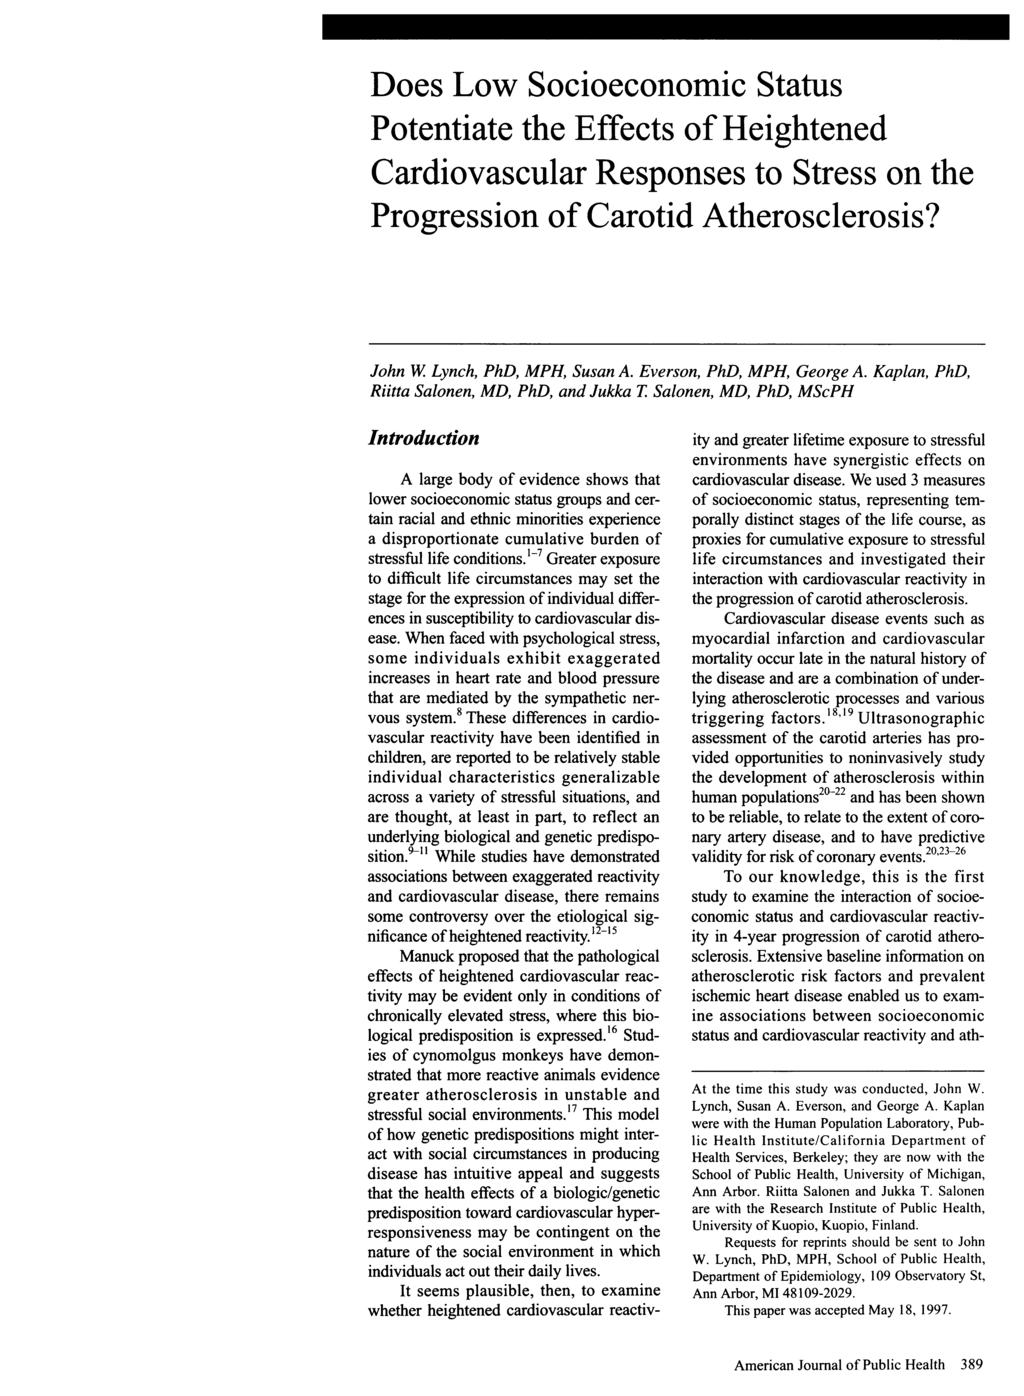 Does Low Socioeconomic Status Potentiate the Effects of Heightened Cardiovascular Responses to Stress on the Progression of Carotid Atherosclerosis? John W Lynch, PhD, MPH, Susan A.